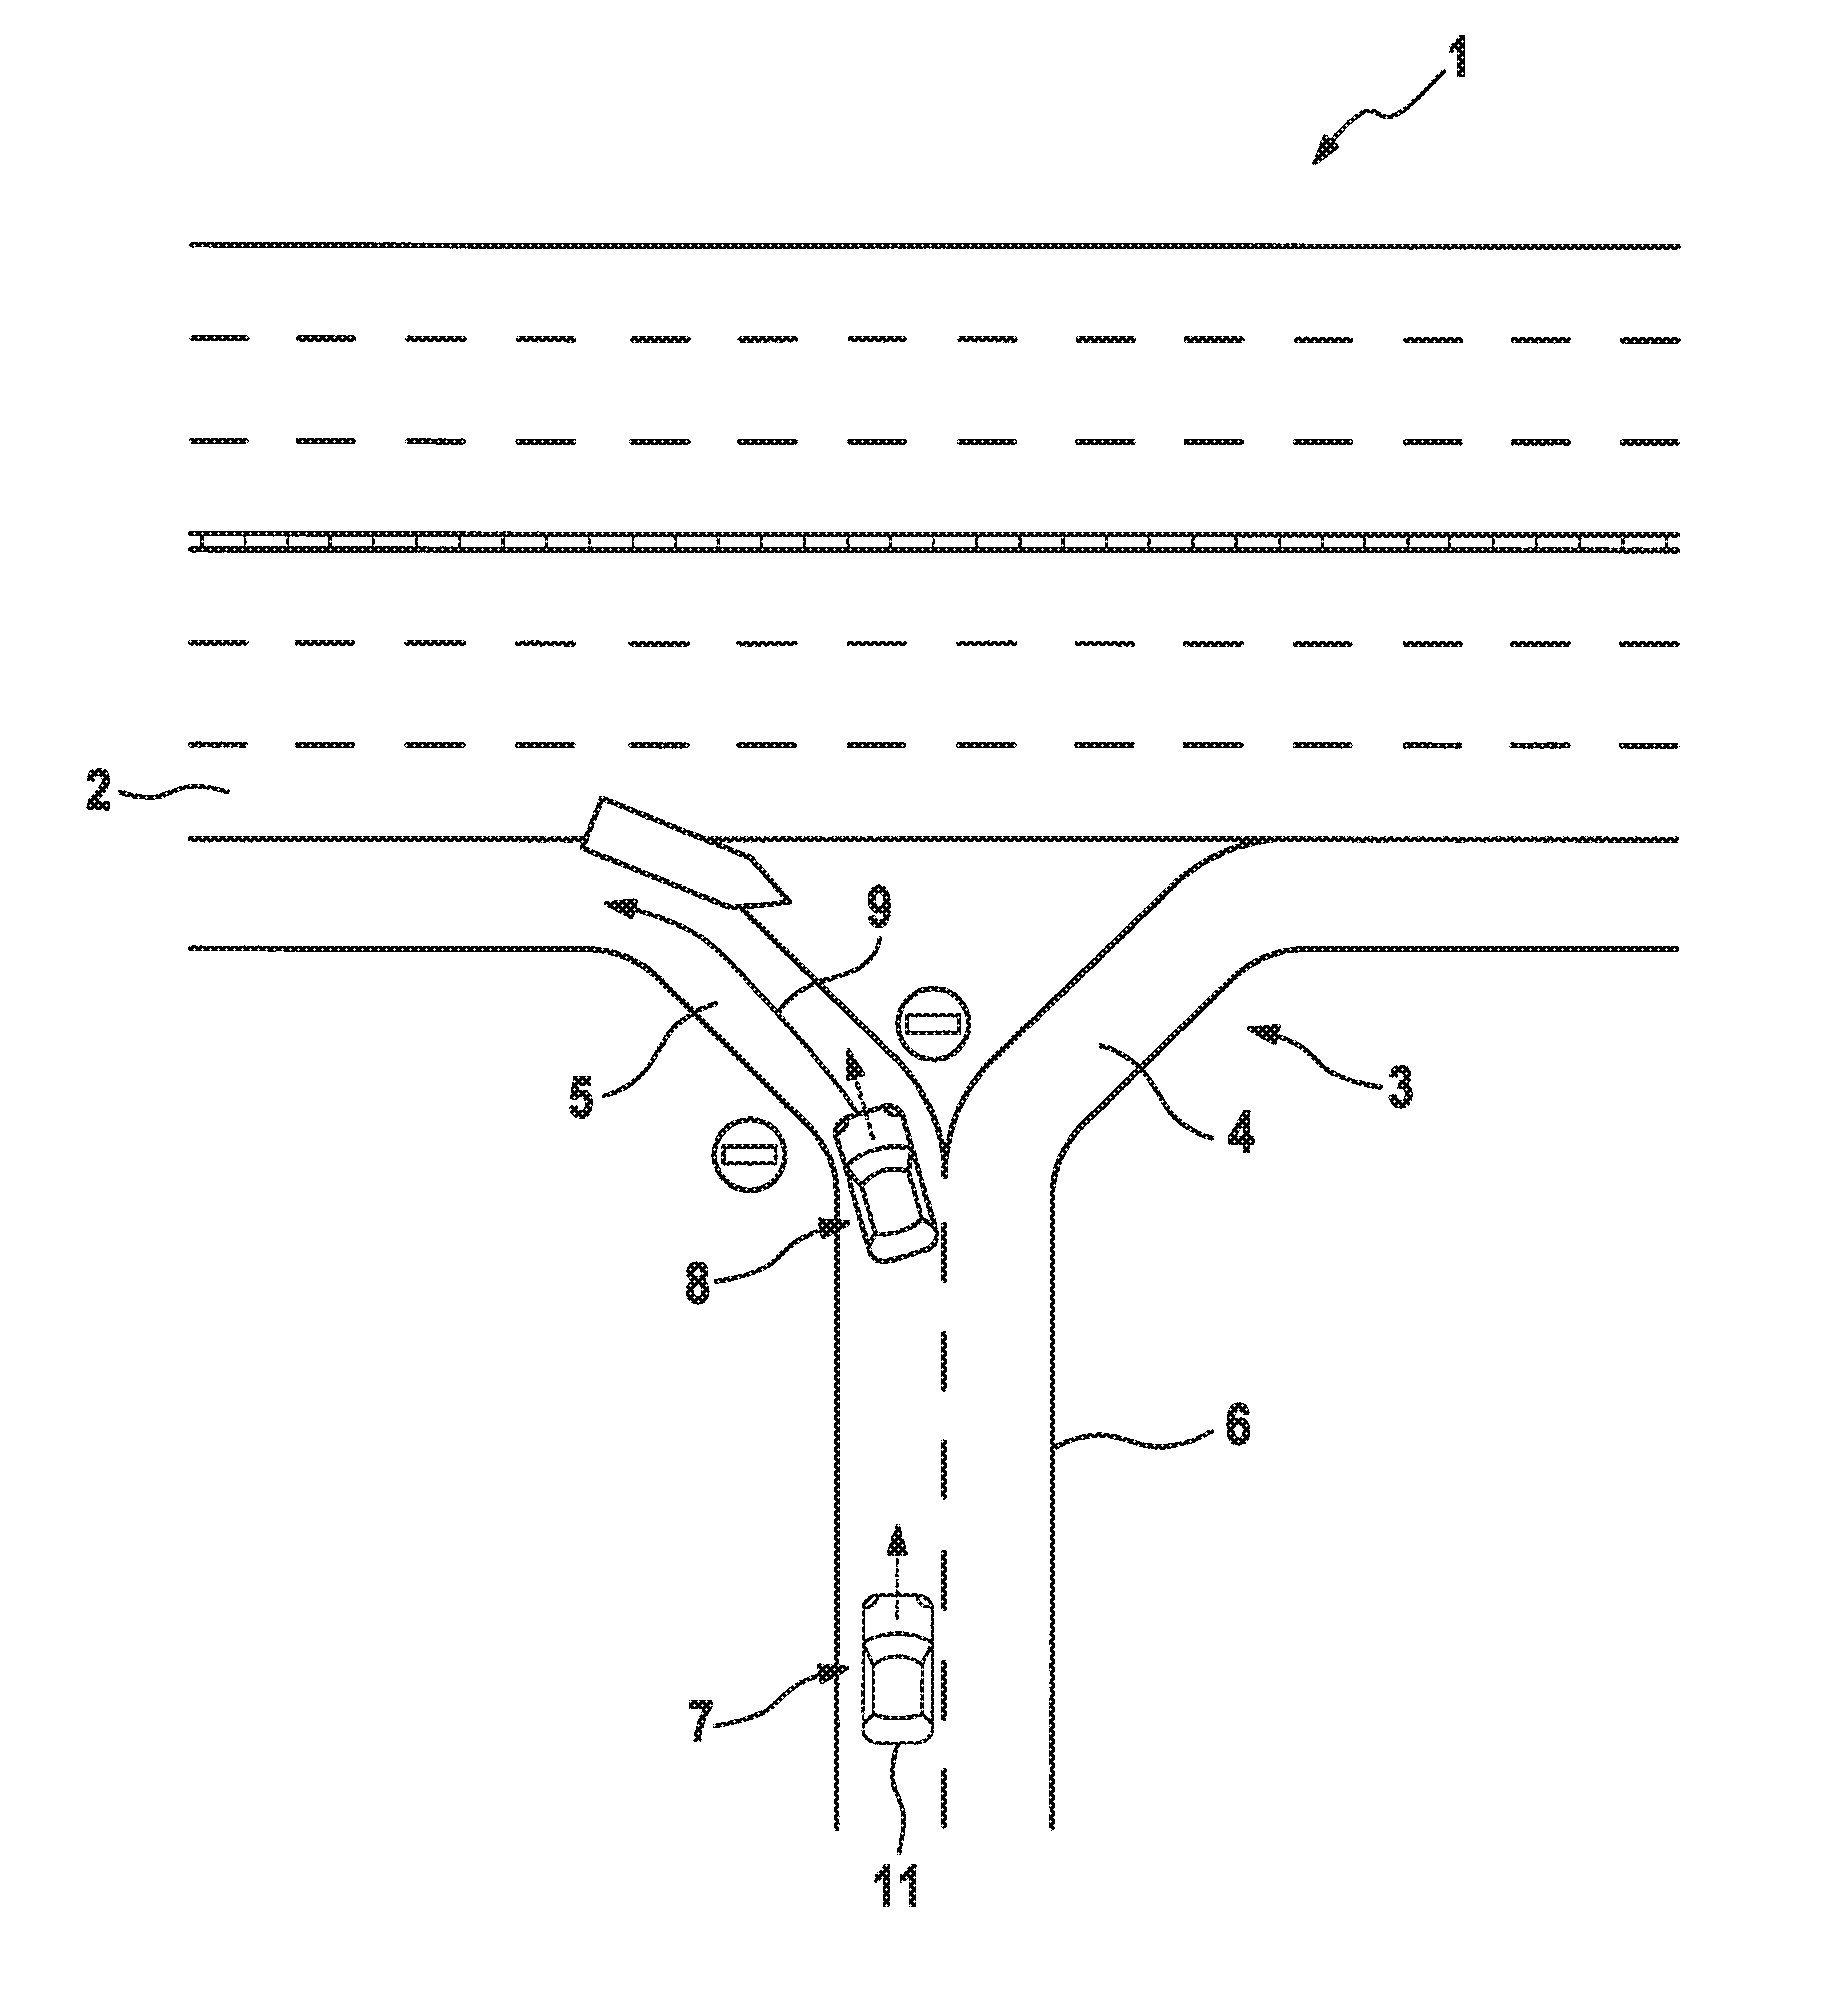 Method and control and detection device for determining the plausibility of a wrong-way travel of a motor vehicle